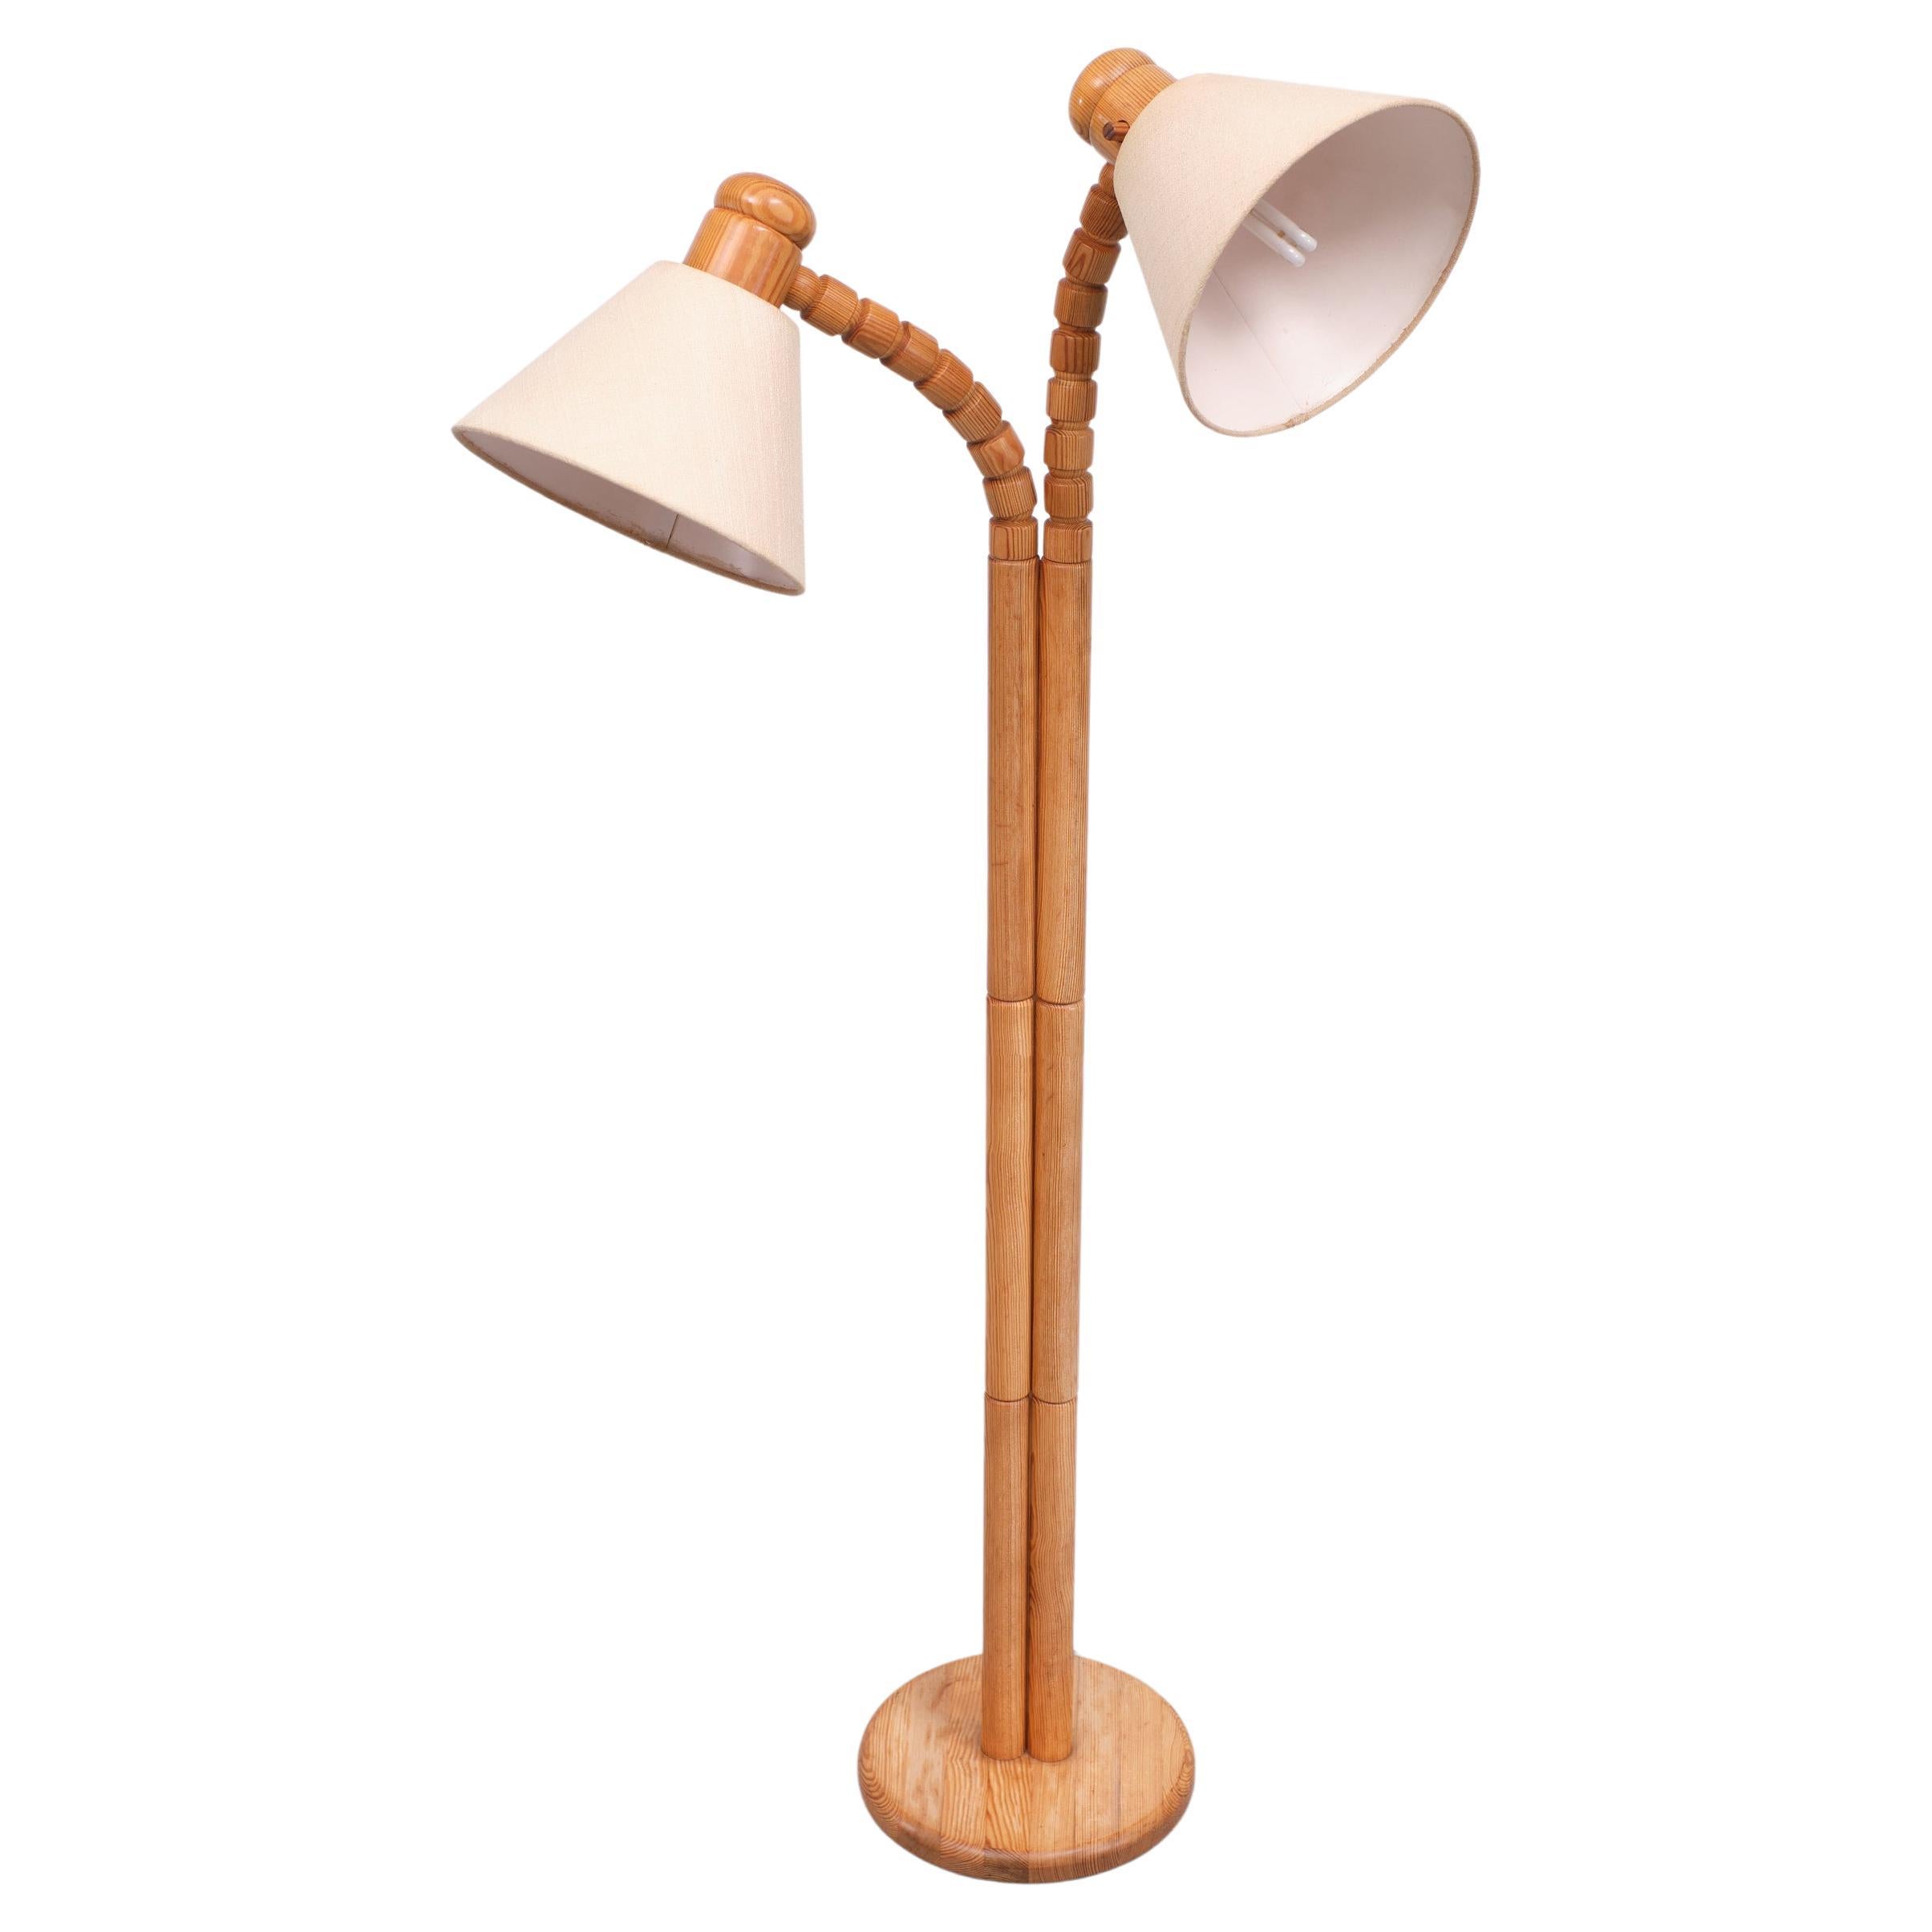 Very nice set of solid pine wood floor lamp and wall lamp. comes with its 
original Linen shades. Flexible Wooden arms. Signed. Large E27 bulbs needed.





Stated dimensions refer to the floor lamp with shade.